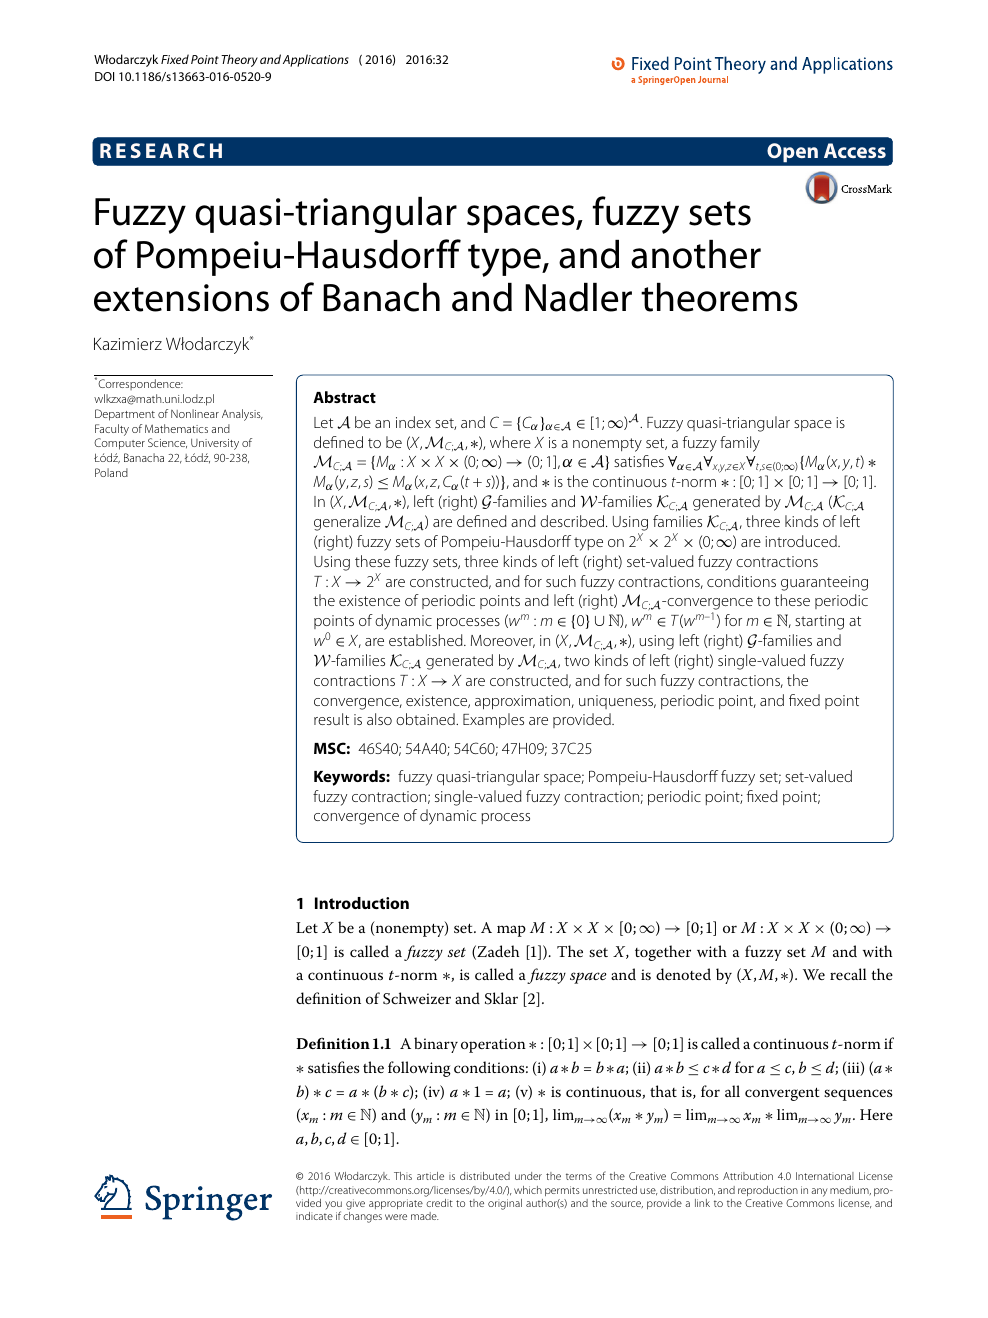 Fuzzy Quasi Triangular Spaces Fuzzy Sets Of Pompeiu Hausdorff Type And Another Extensions Of Banach And Nadler Theorems Topic Of Research Paper In Mathematics Download Scholarly Article Pdf And Read For Free On